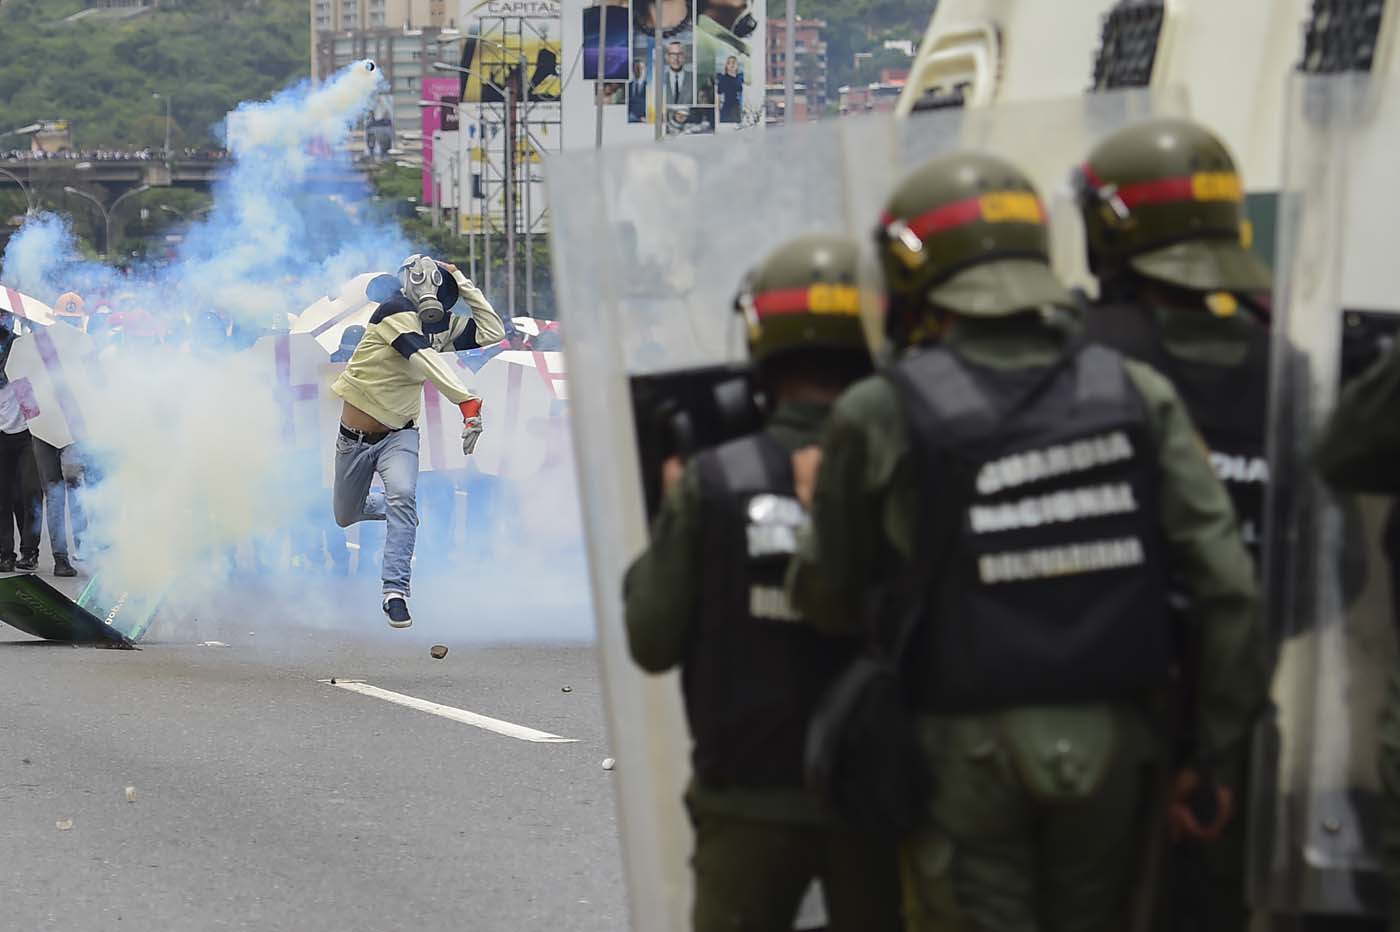 Riot police agents clash with demonstrators during a protest against Venezuelan President Nicolas Maduro, in Caracas on May 3, 2017. Venezuela's angry opposition rallied Wednesday vowing huge street protests against President Nicolas Maduro's plan to rewrite the constitution and accusing him of dodging elections to cling to power despite deadly unrest. / AFP PHOTO / RONALDO SCHEMIDT